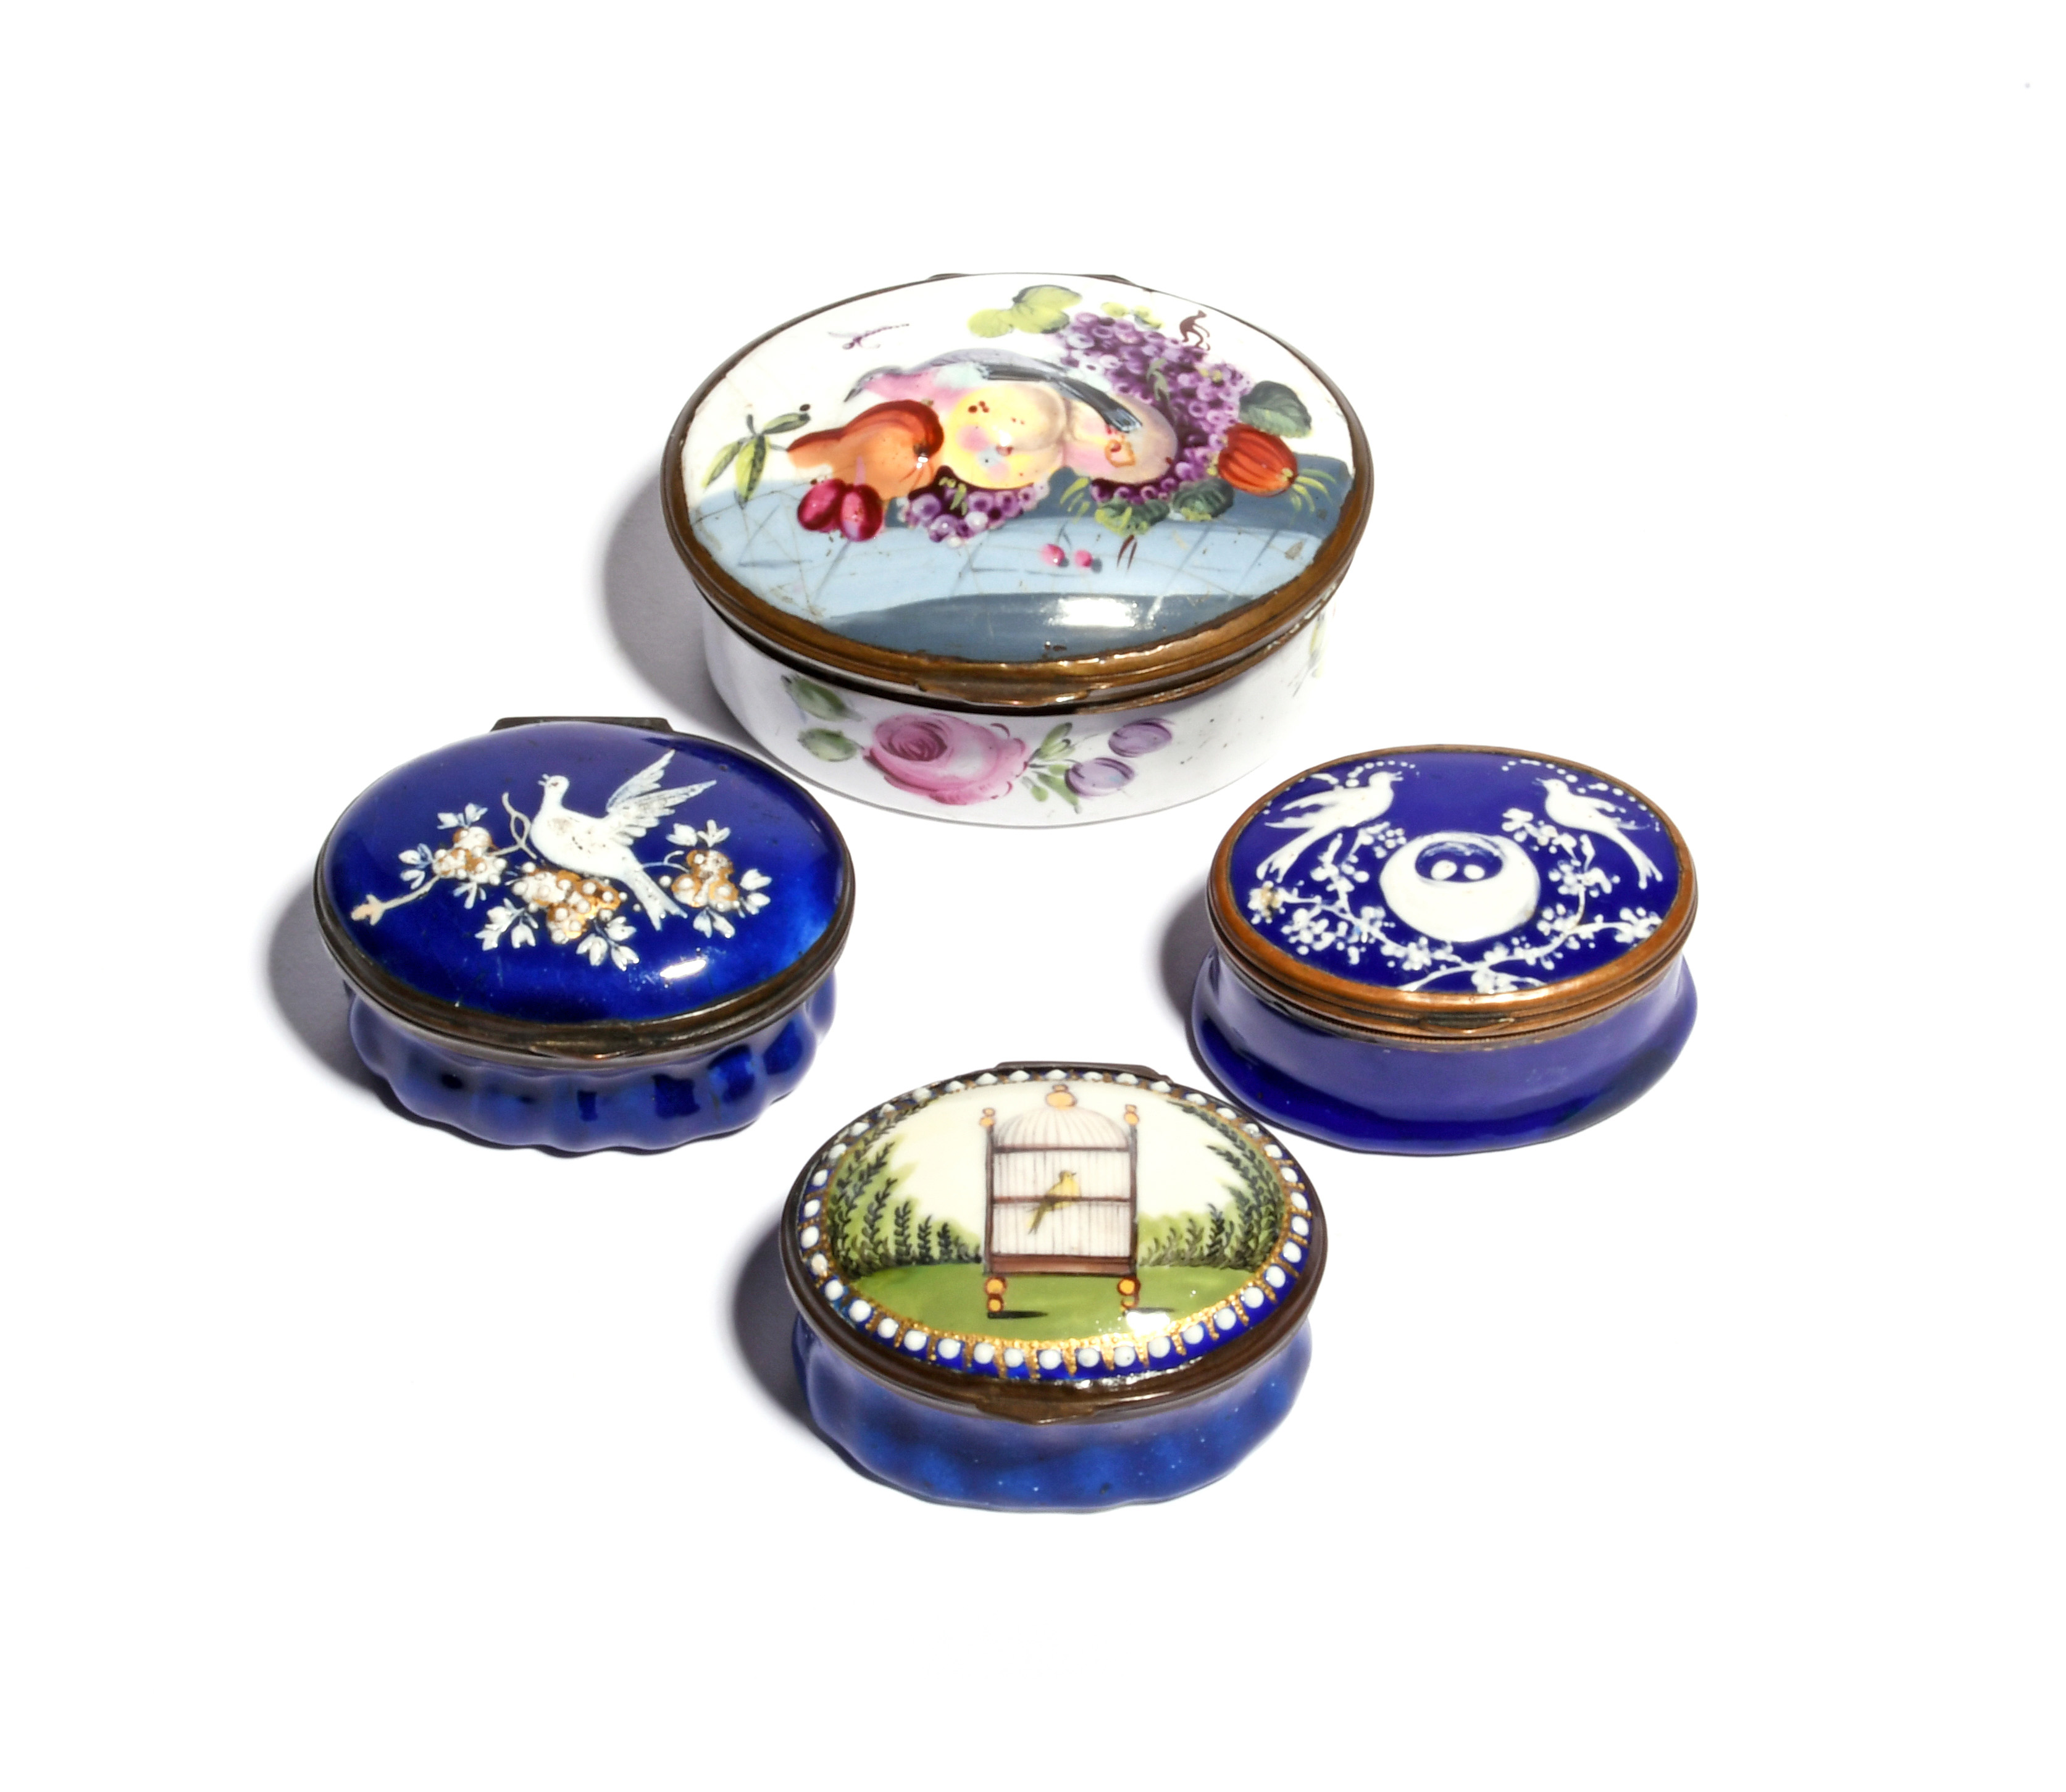 Three enamel patch boxes and a snuff box c.1760-80, the oval forms variously decorated with birds on